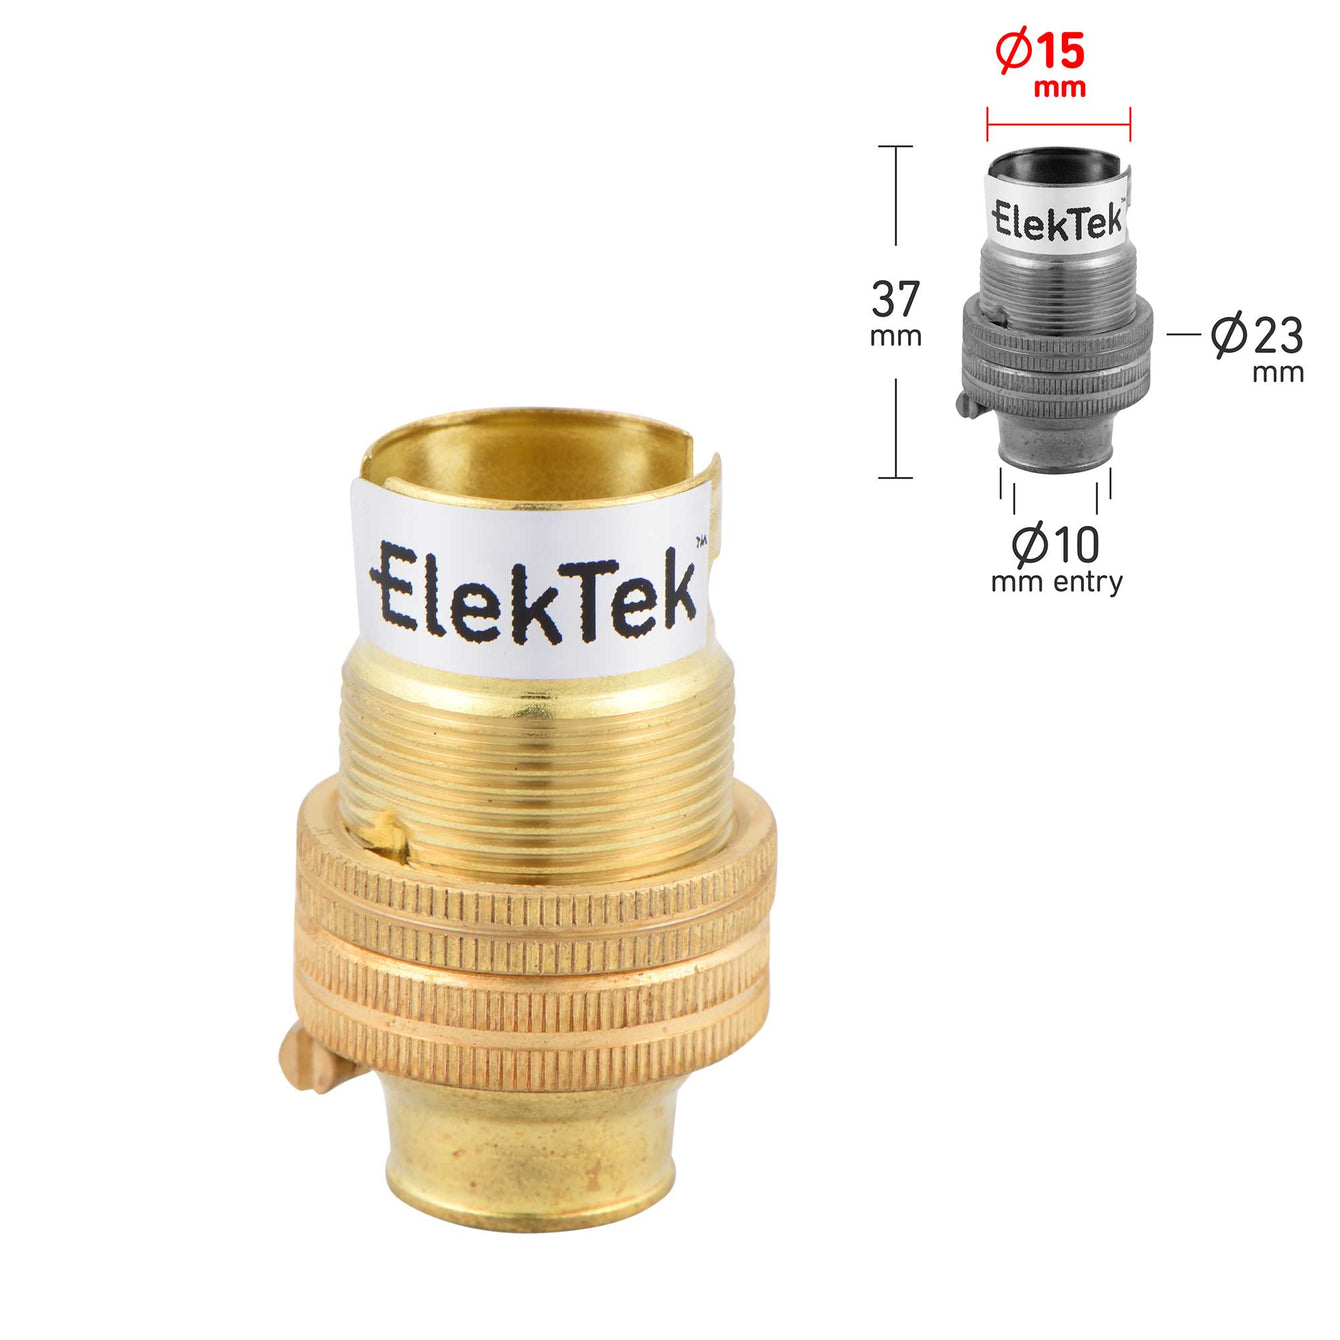 ElekTek Lamp Holder 10mm or Half Inch Entry Miniature Small Bayonet Cap SBC B15 With Shade Ring Solid Brass - Buy It Better Antique Brass / 10mm